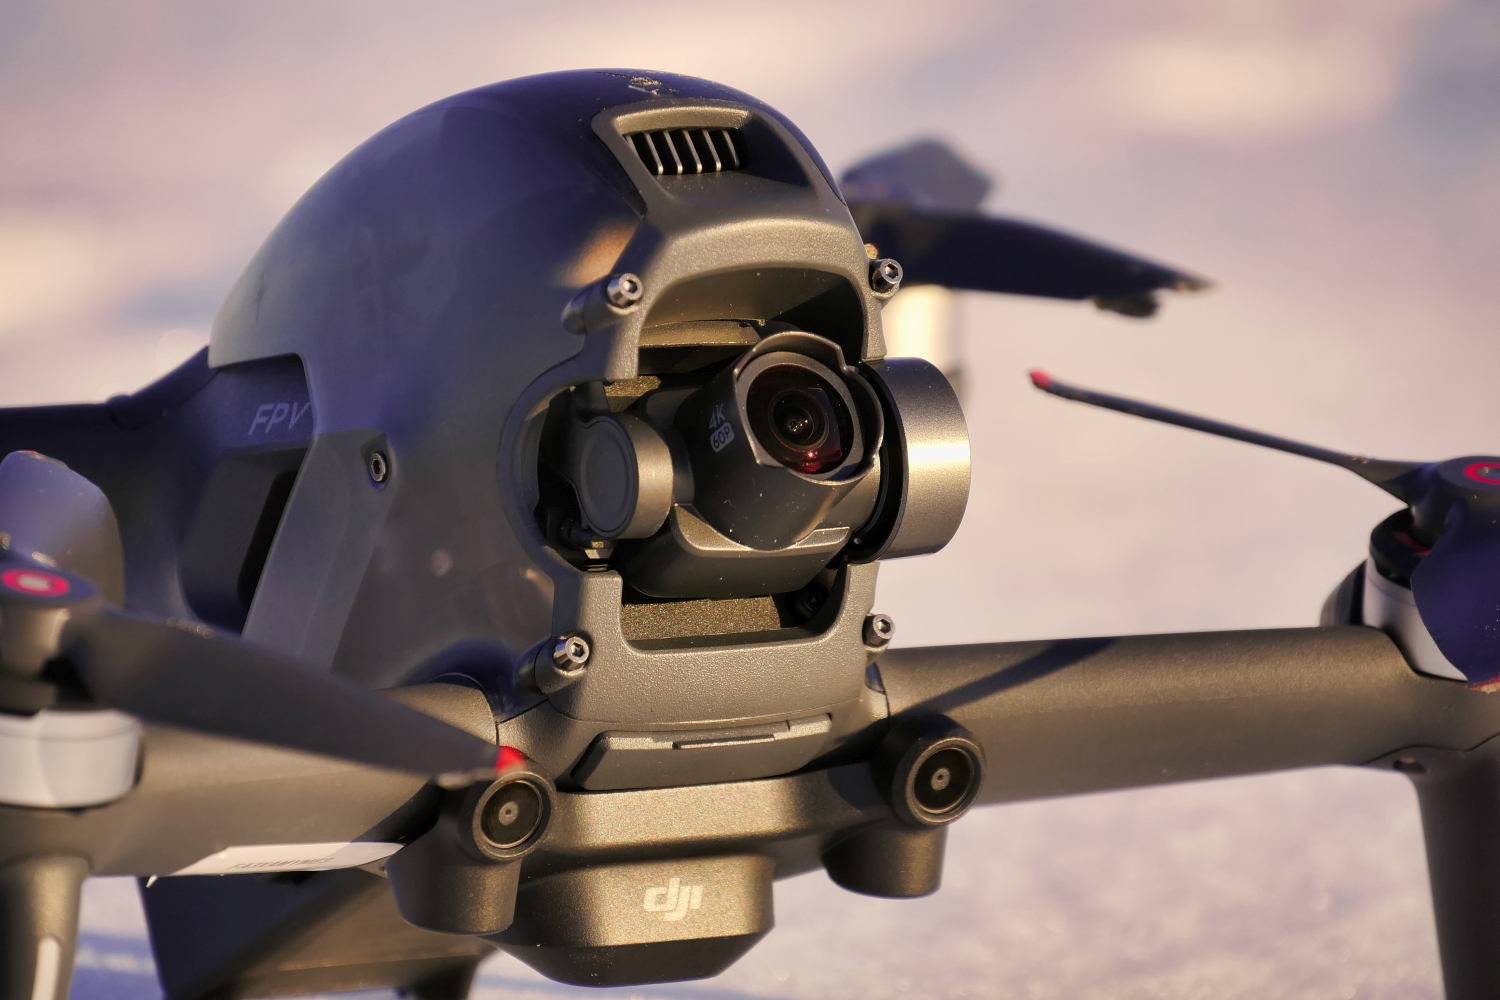 DJI FPV Review: An Endeavor for Serious Drone | Digital Trends